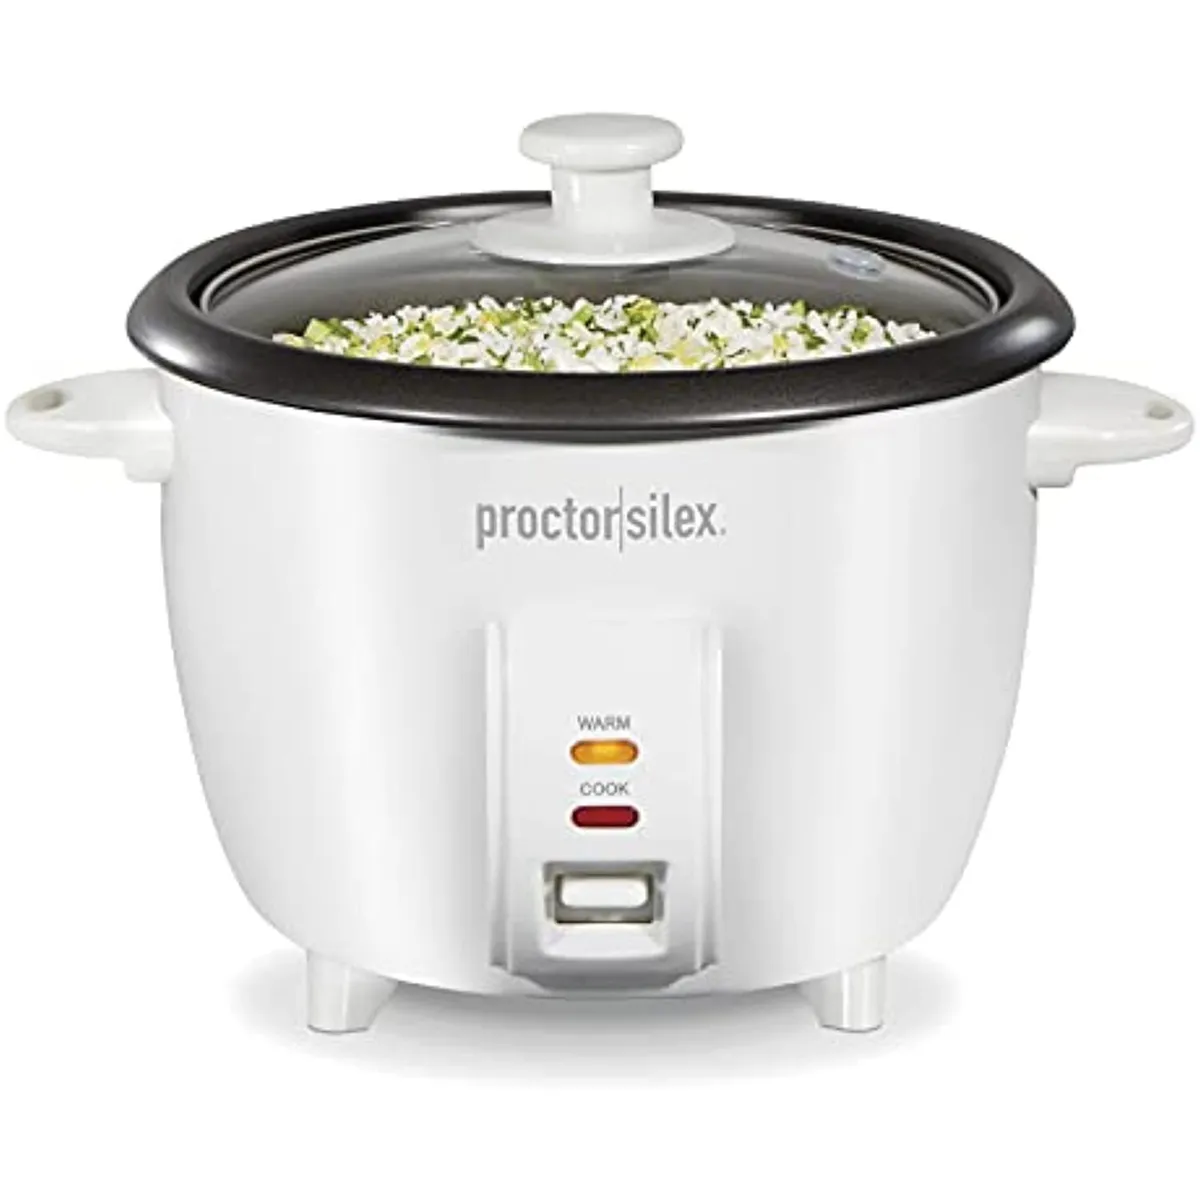 How To Use Proctor Silex Rice Cooker